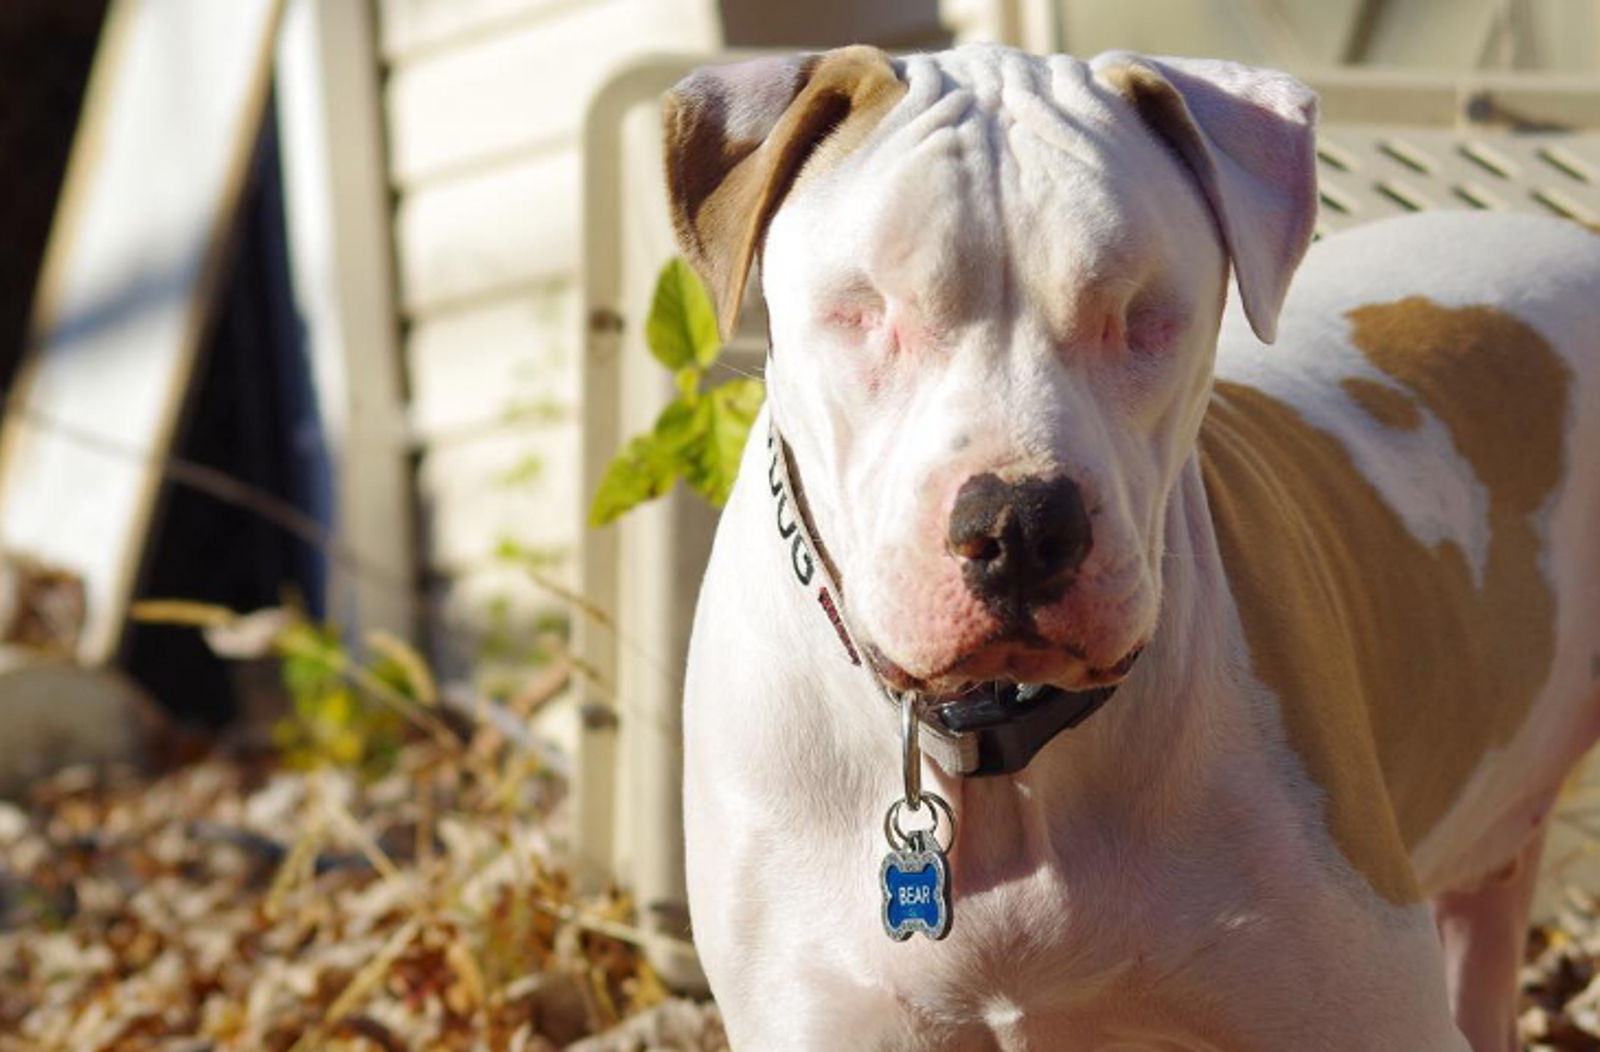 This Dog May Have Lost His Eyes, but His Heart Just Keeps on Growing